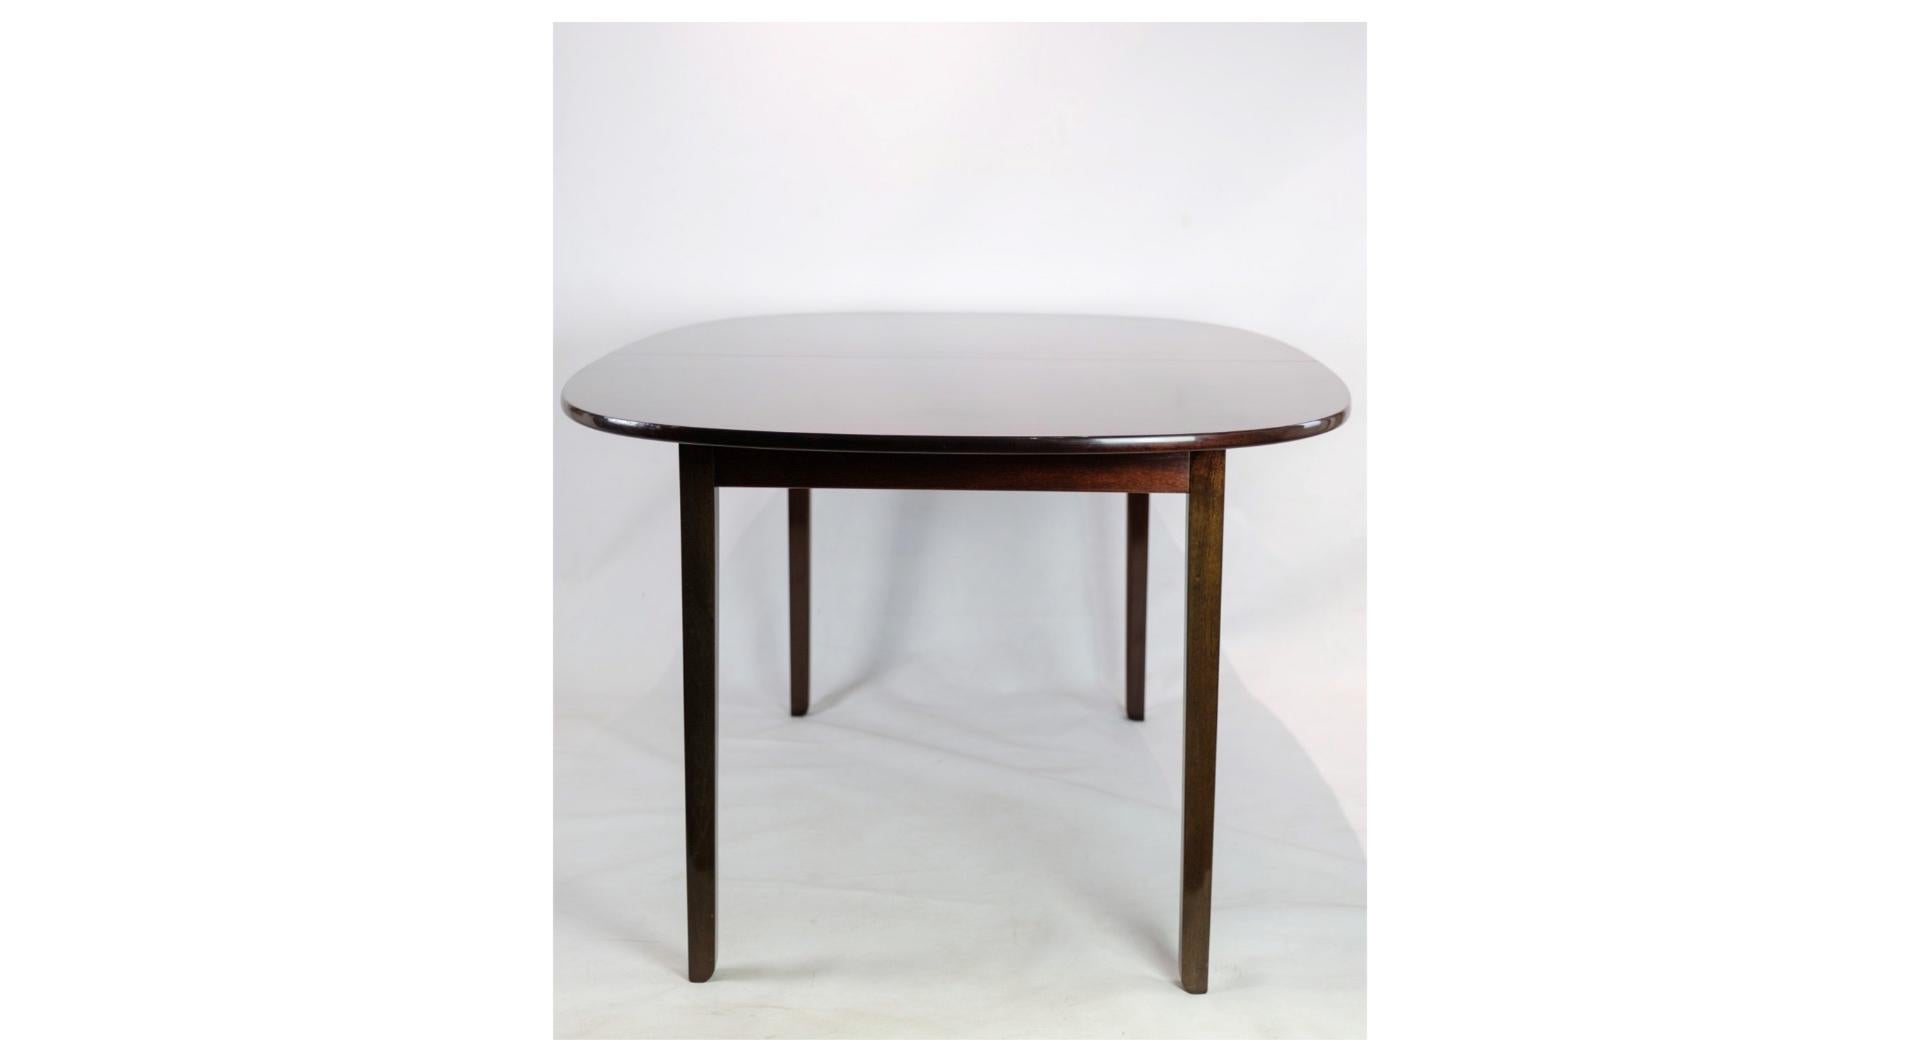 Mid-20th Century Dining Table Made In Dark Mahogany Designed By Ole Wancher Made by P. Jeppesen For Sale